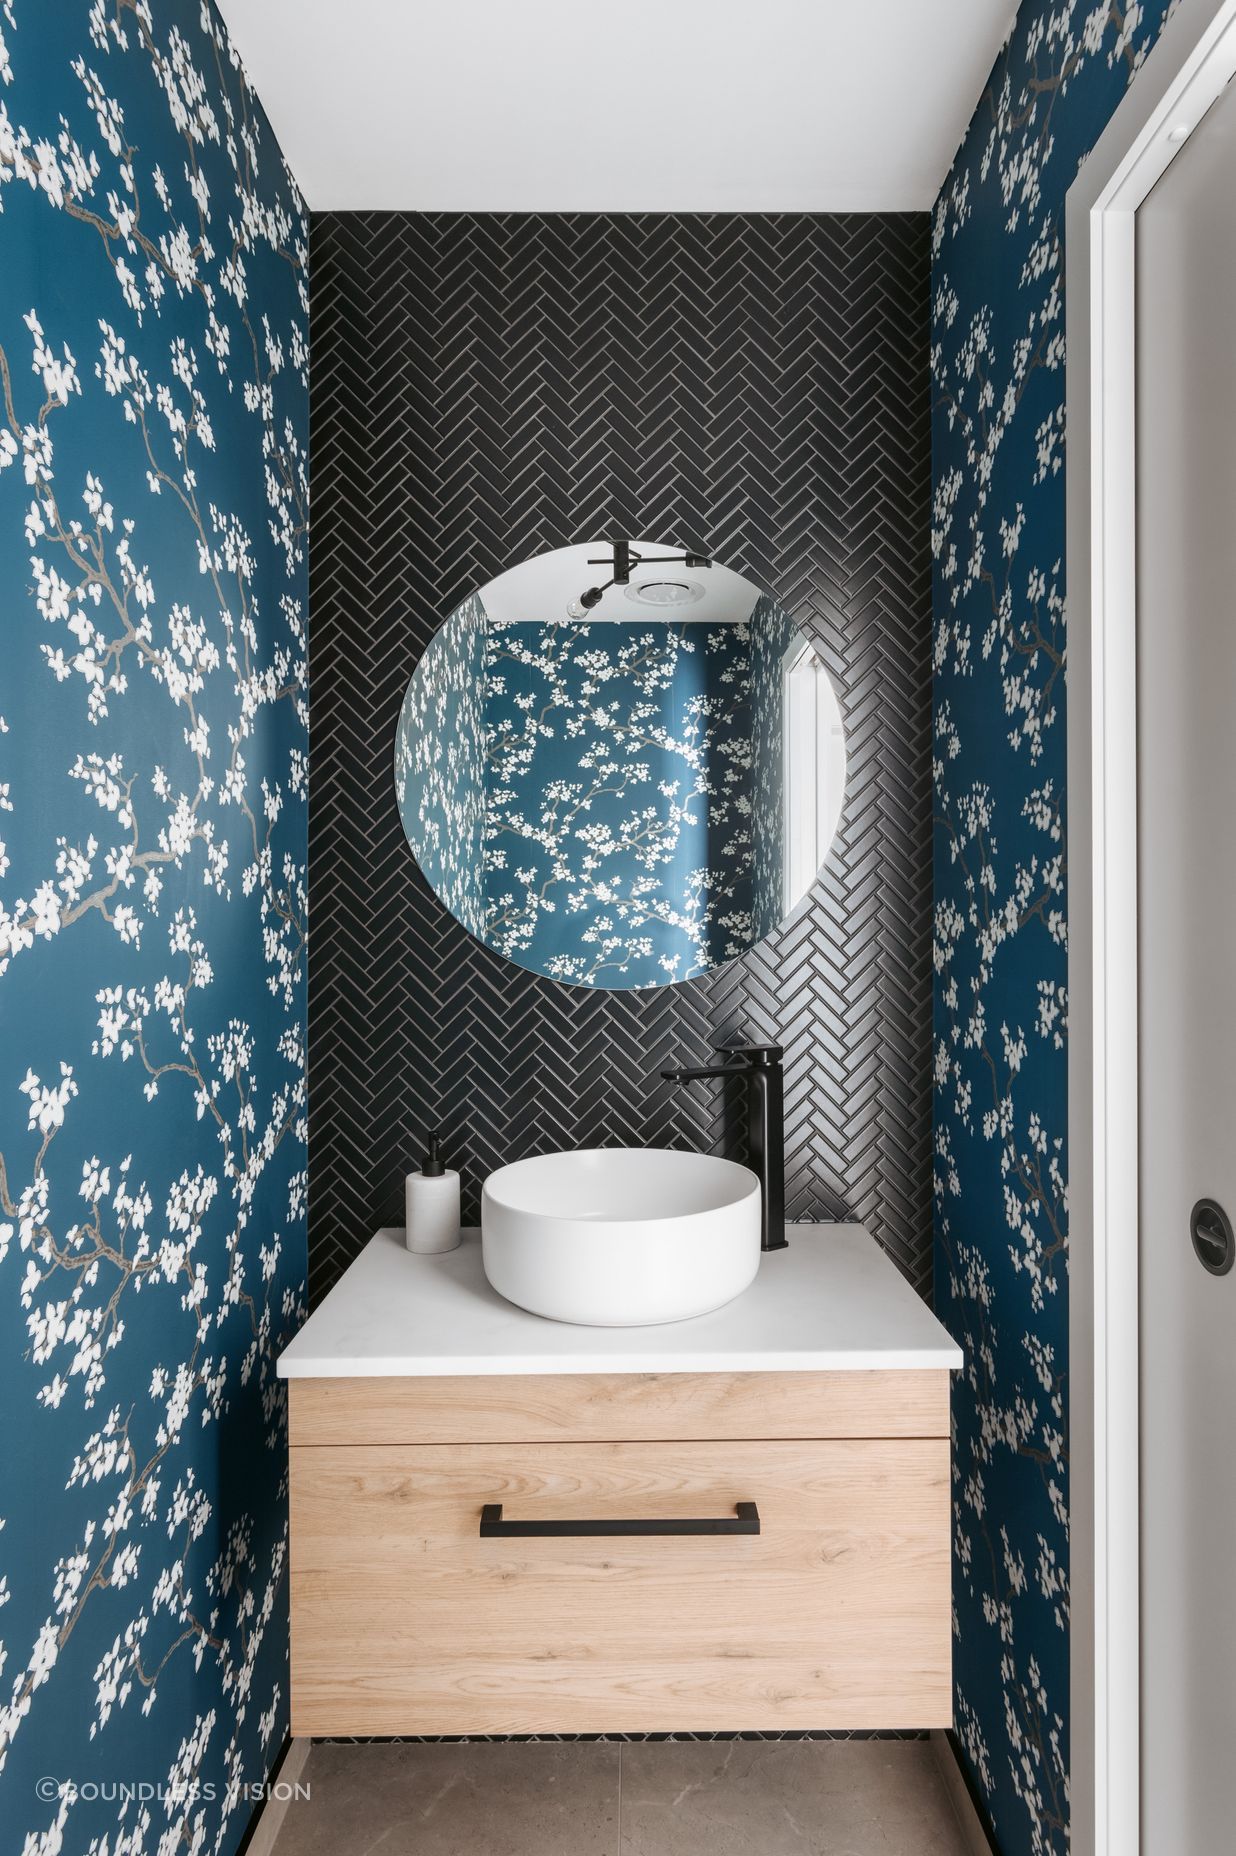 The guest powder room delights with its black herringbone tiles and cherry blossom covered wallpaper.